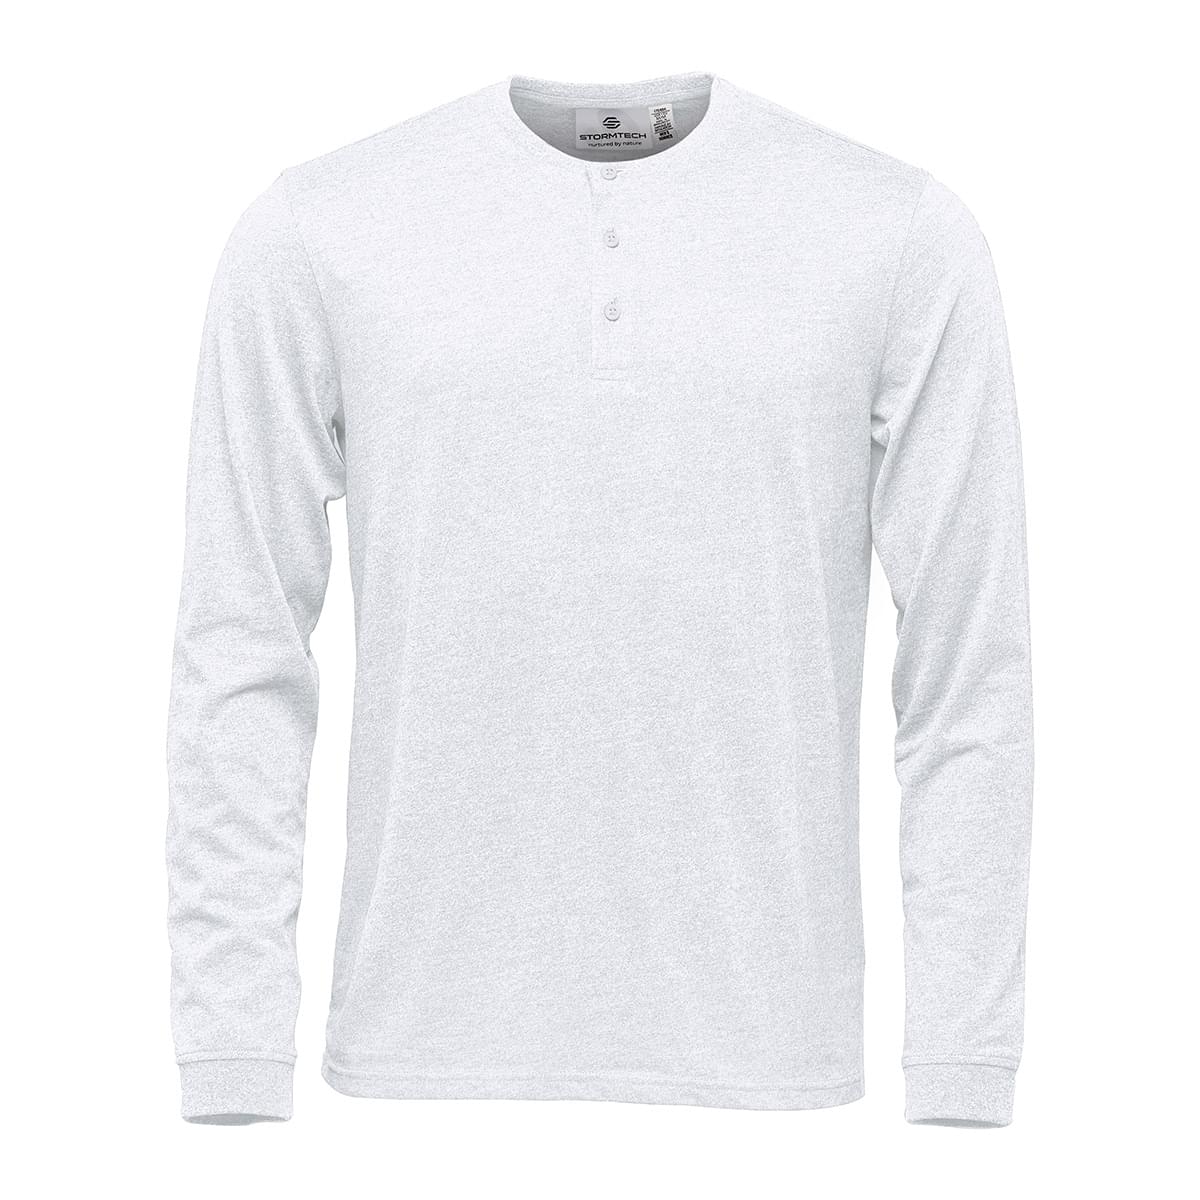 Henley Shirt Mens Long Sleeve Button Thermal Slim Fit Pullover WHITE NEW